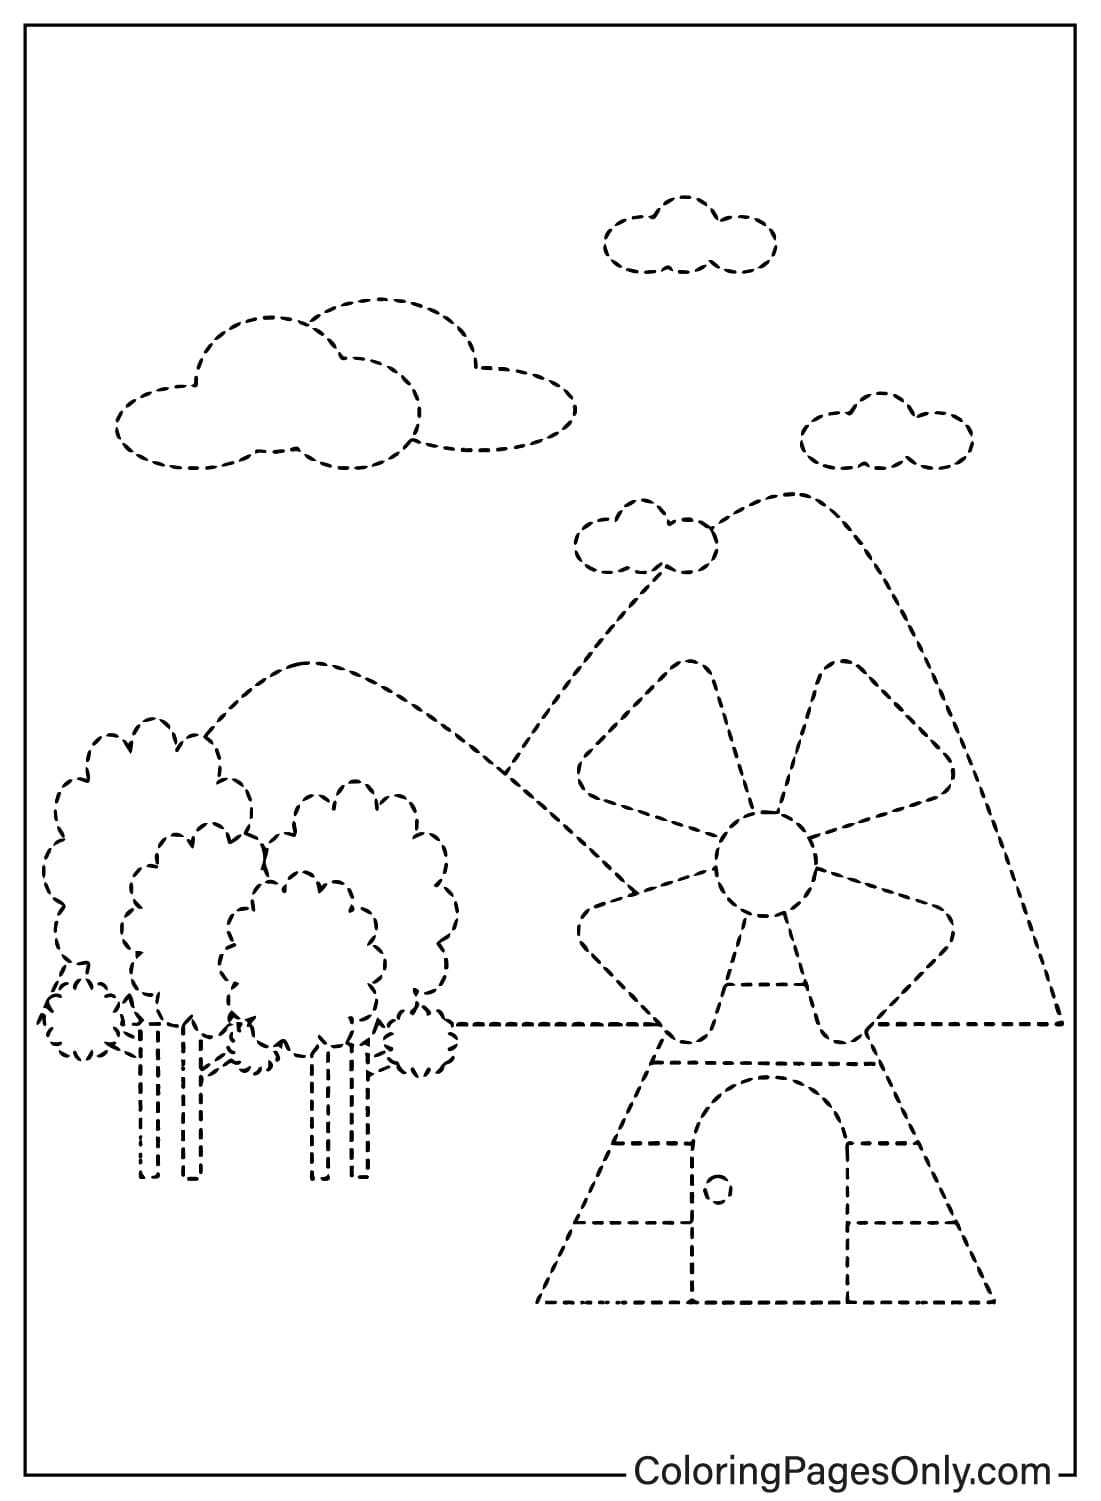 Tracing Free Printable Coloring Page from Tracing